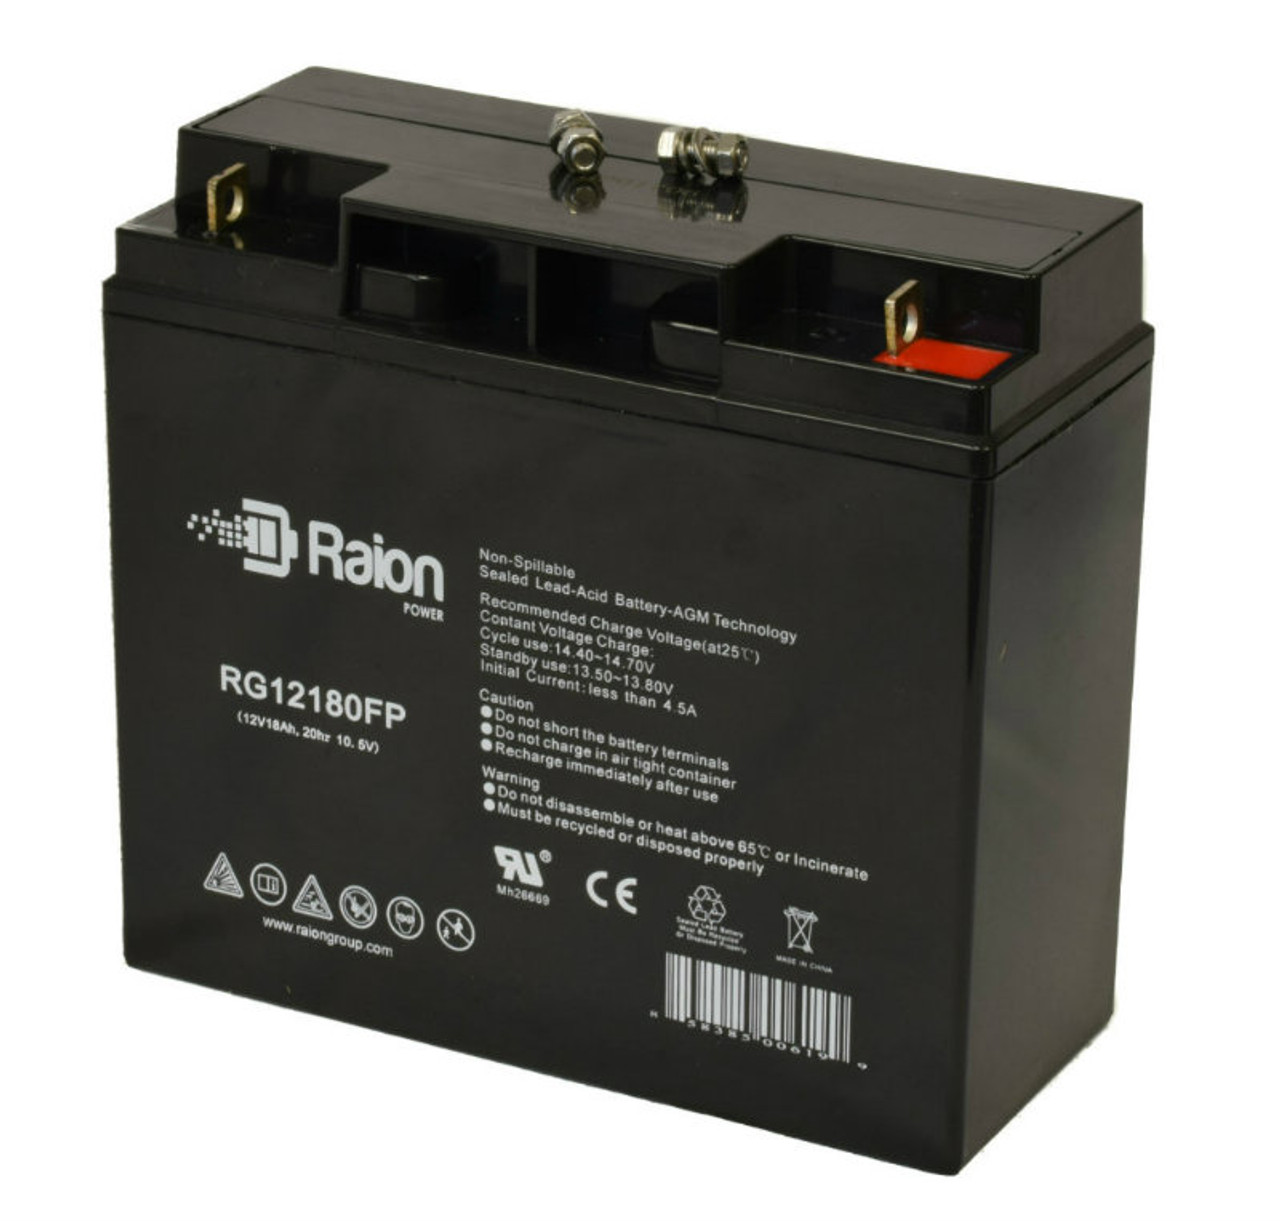 Raion Power Replacement 12V 18Ah Emergency Light Battery for Simplex Alarm 20819275 - 1 Pack